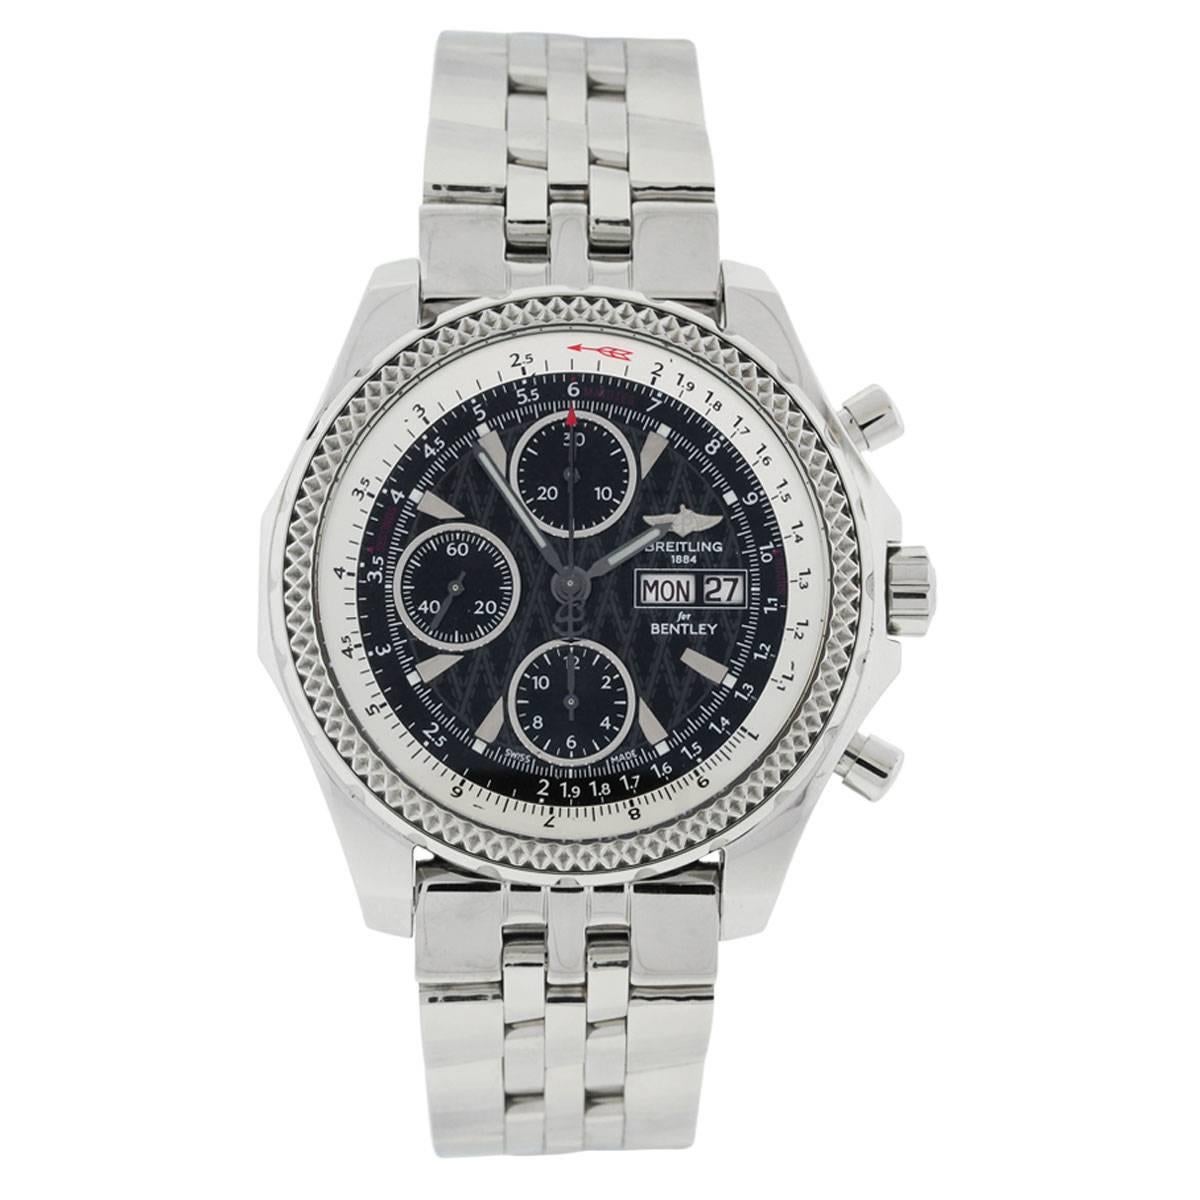 Brand: Breitling
MPN: A123362
Model: Bentley
Case Material: Stainless steel
Case Diameter: 44mm
Crystal: Scratch resistant sapphire
Bezel: Bidirectional
Dial: Black wave dial with day and date window at the 3 o’clock position
Bracelet: Stainless